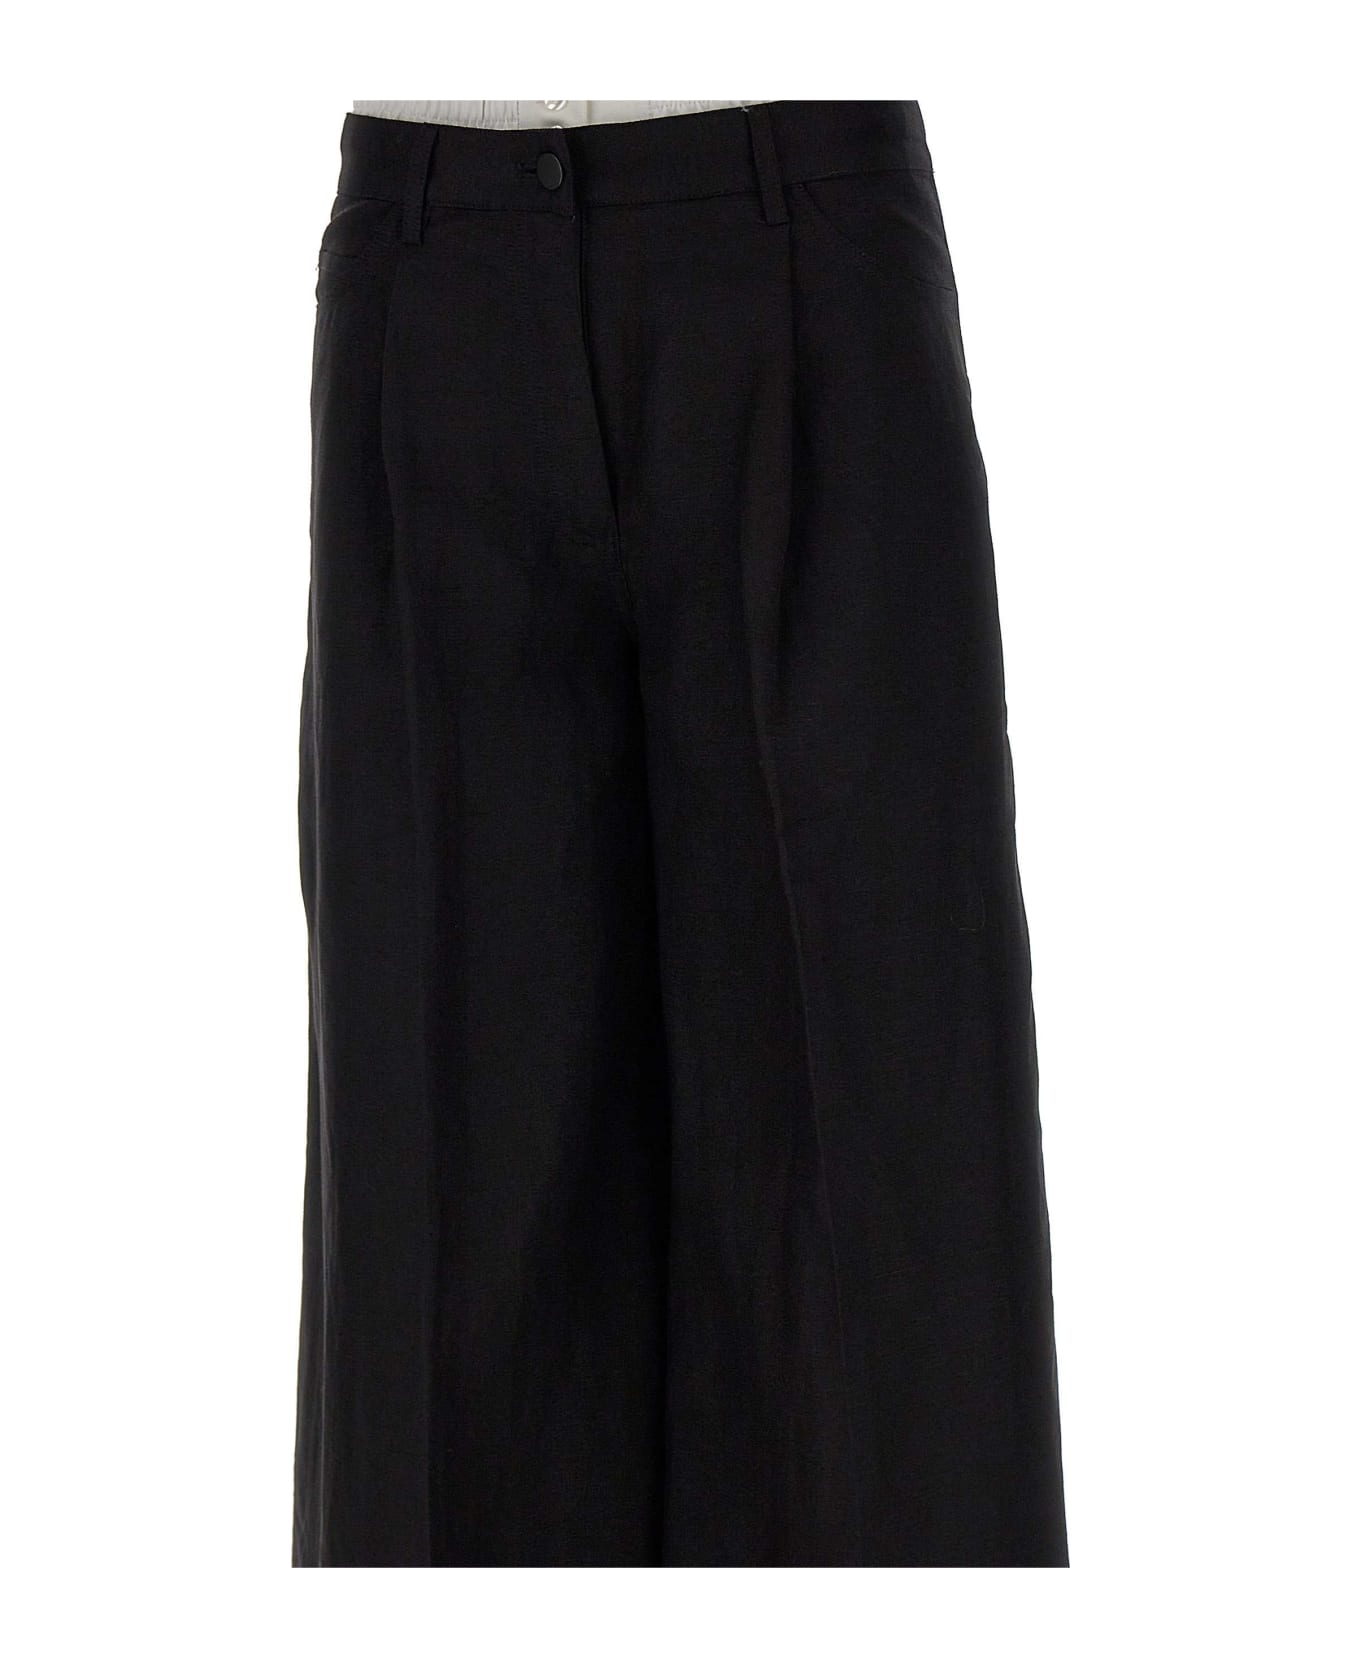 REMAIN Birger Christensen Linen And Viscose Trousers - BLACK ボトムス